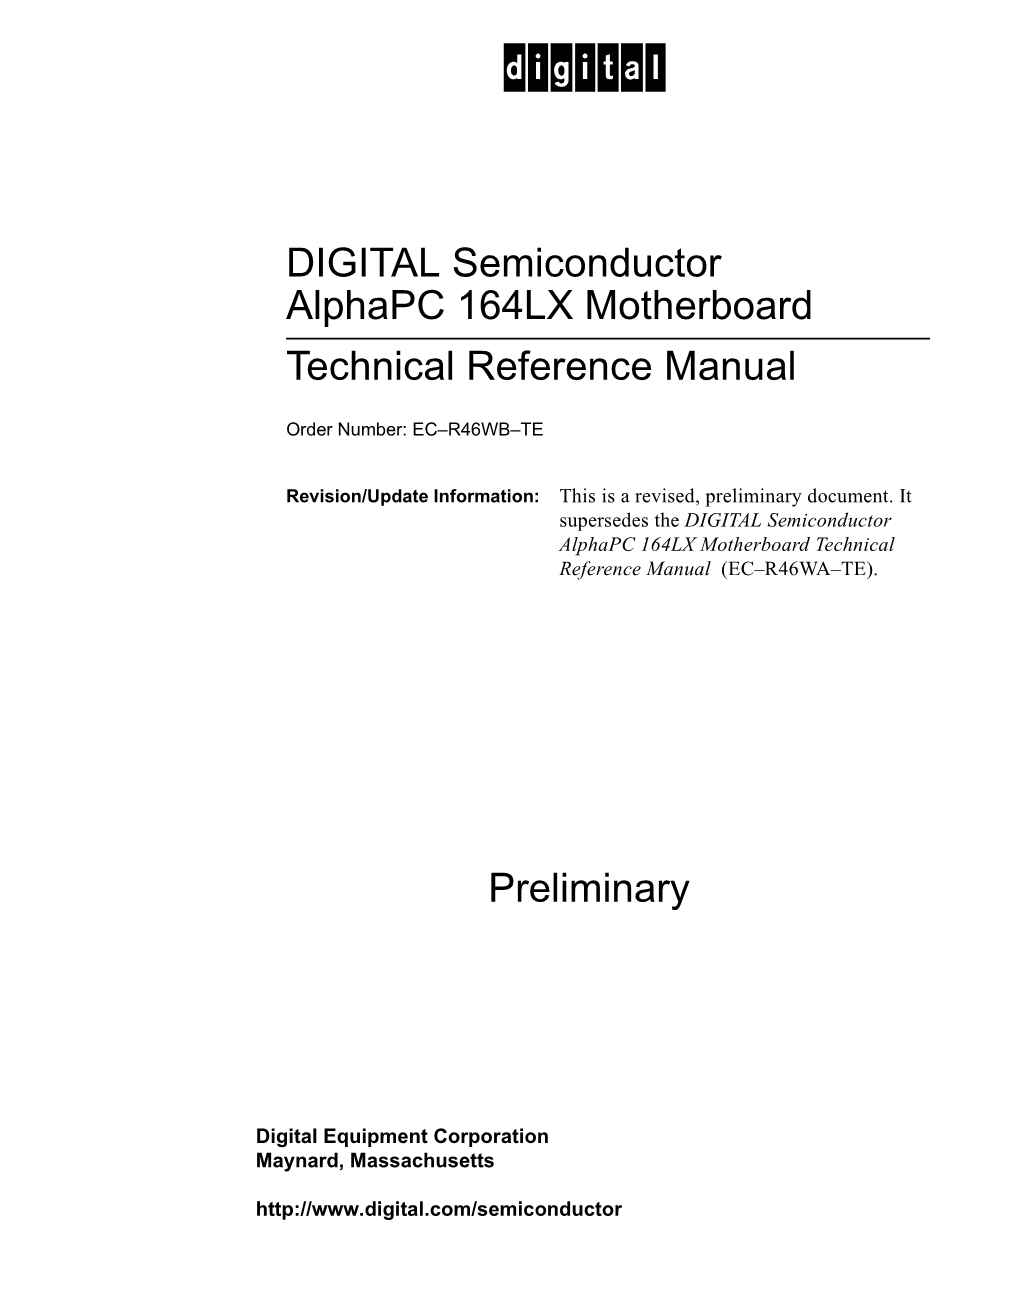 DIGITAL Semiconductor Alphapc 164LX Motherboard Technical Reference Manual